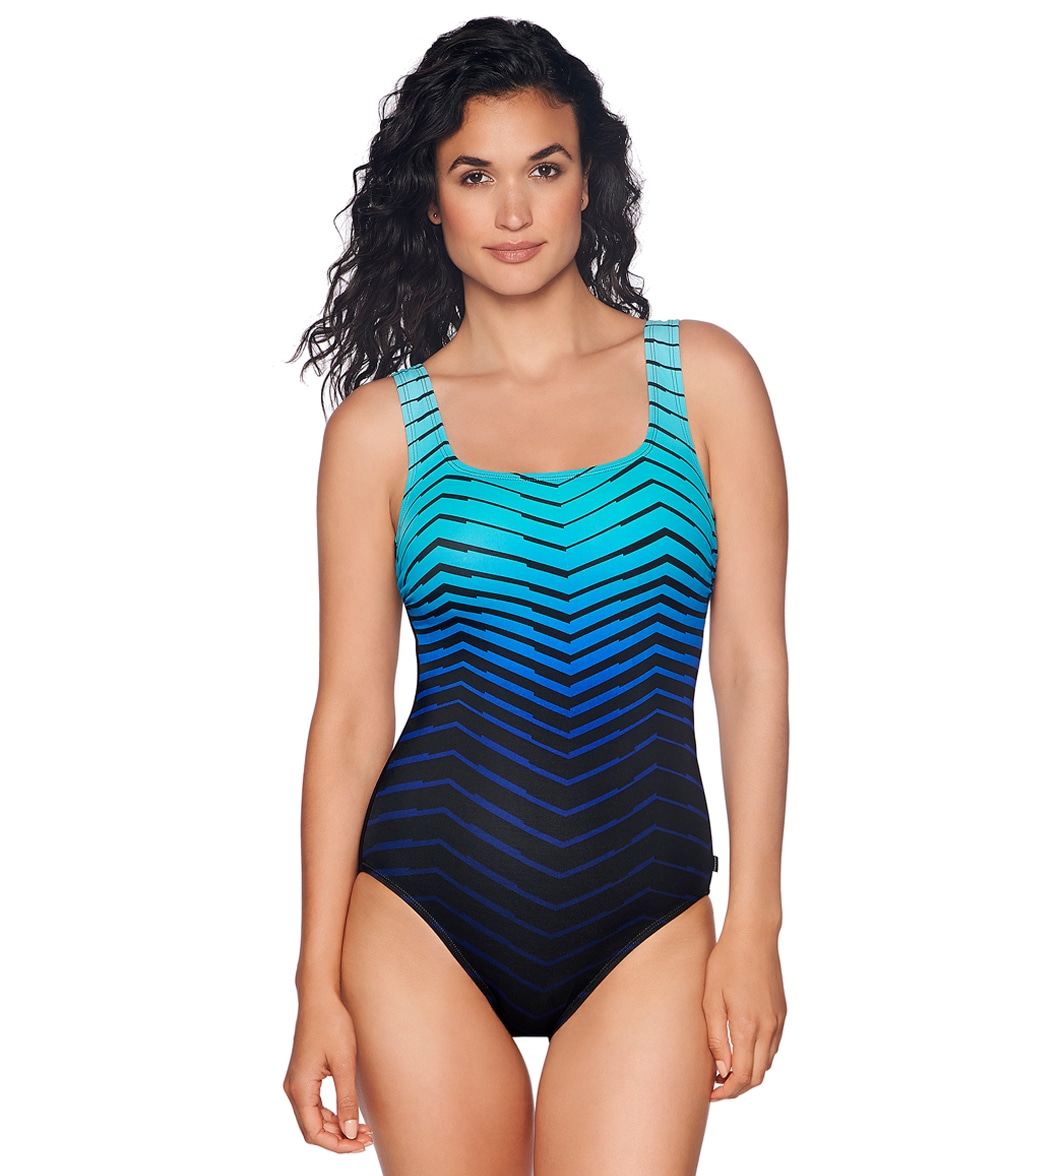 Reebok Women S Prime Performance Scoop Back Chlorine Resistant One Piece Swimsuit At Swimoutlet